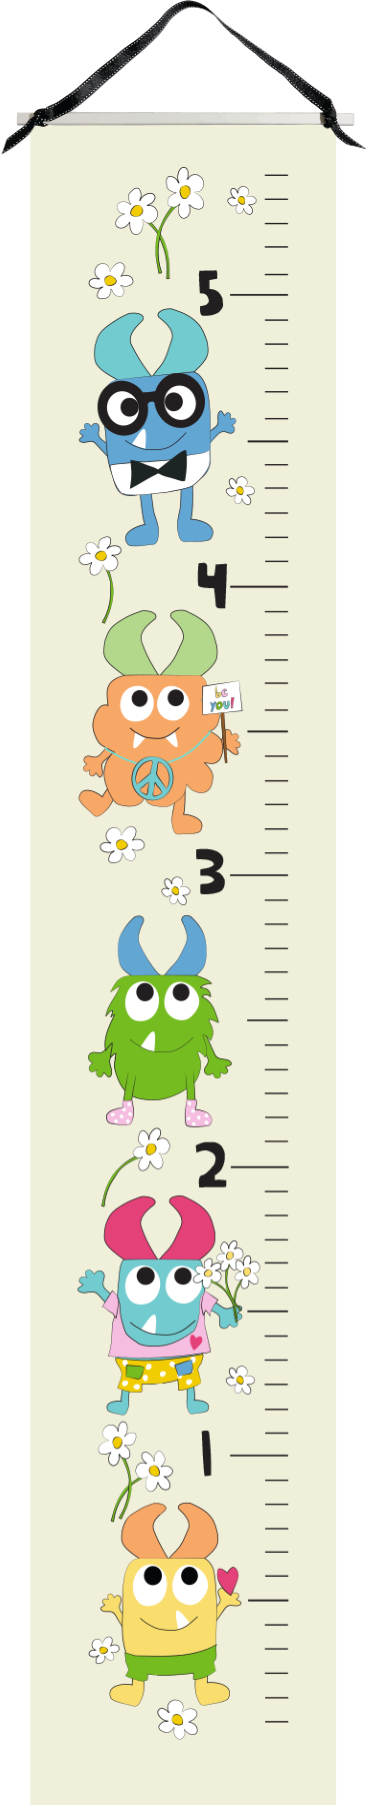 Monster Hanging Growth Chart